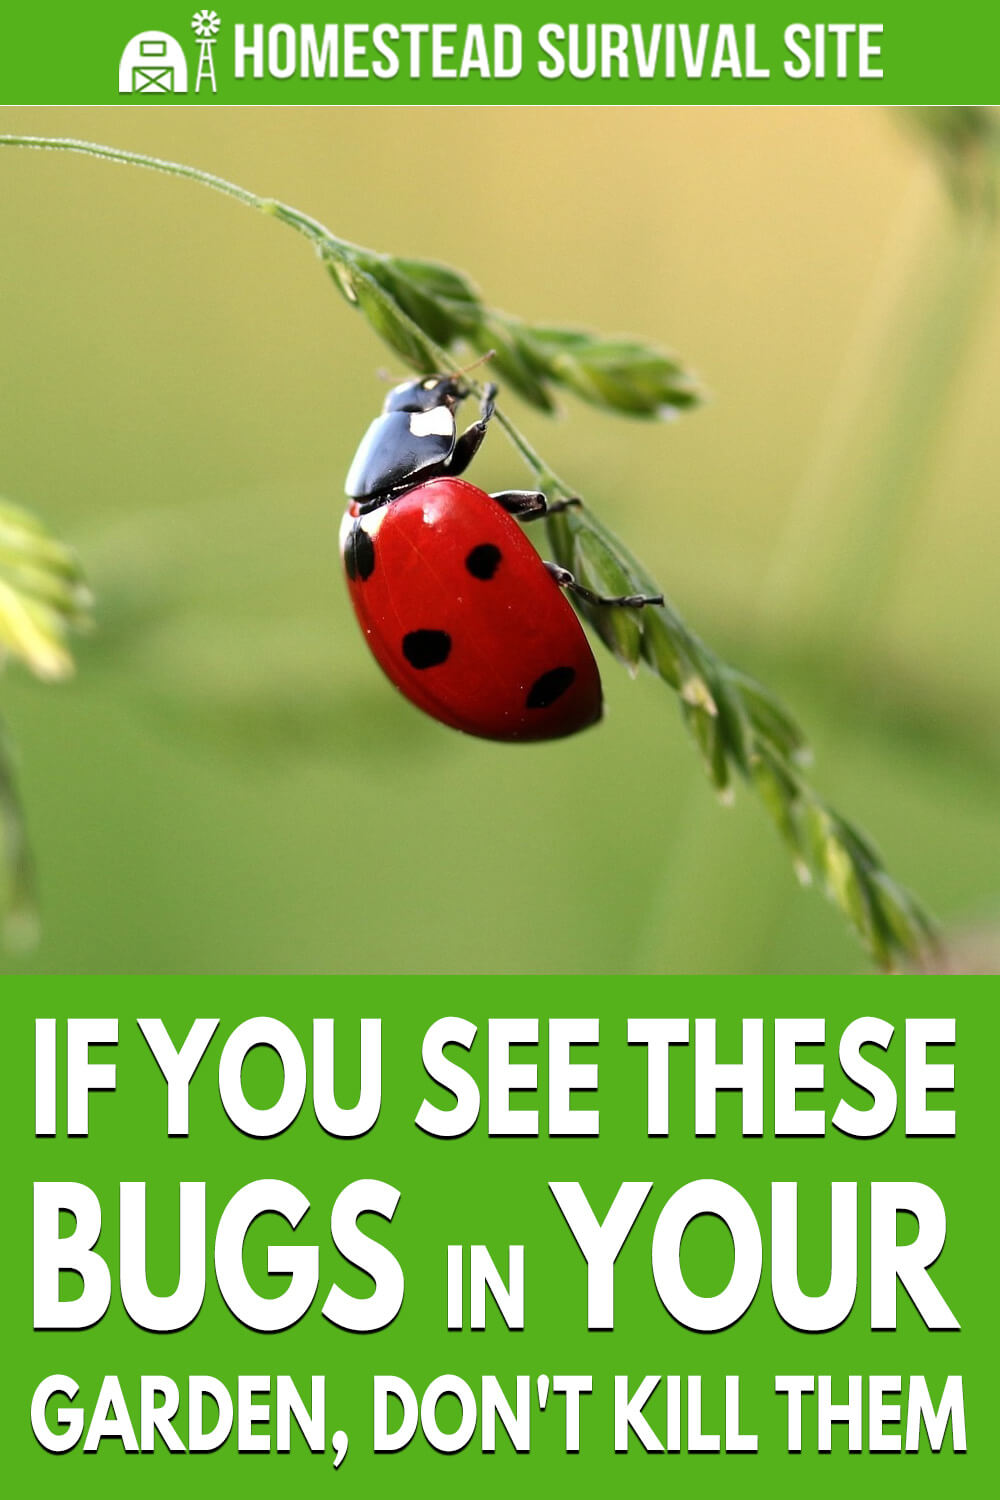 If You See These Bugs In Your Garden, Don't Kill Them